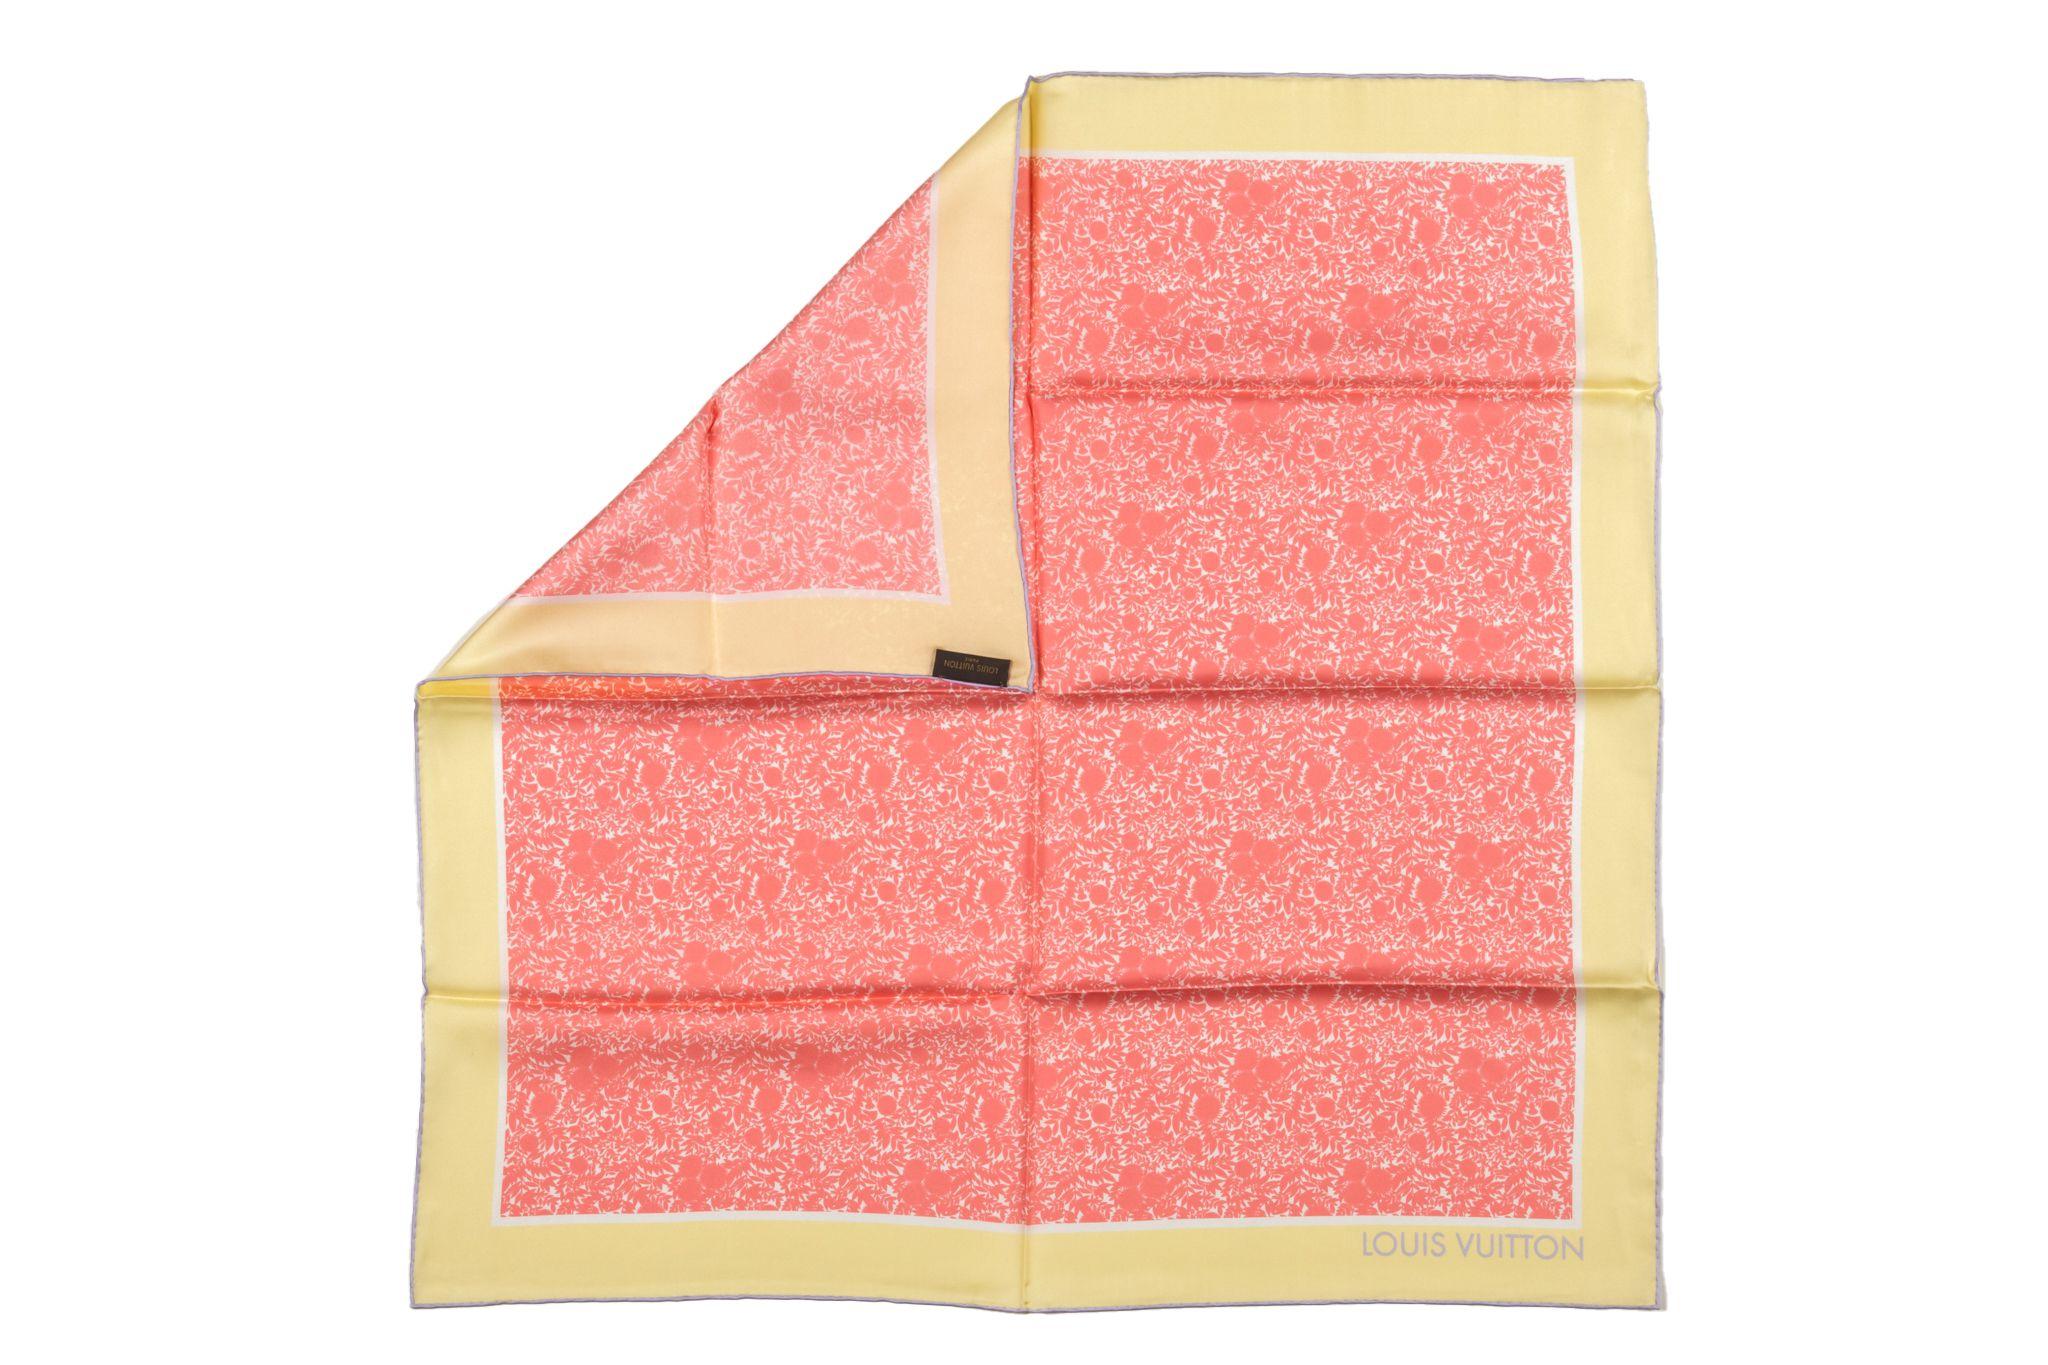 Louis Vuitton Silk scarf in pink with beige rolled edges. The piece is in excellent condition.